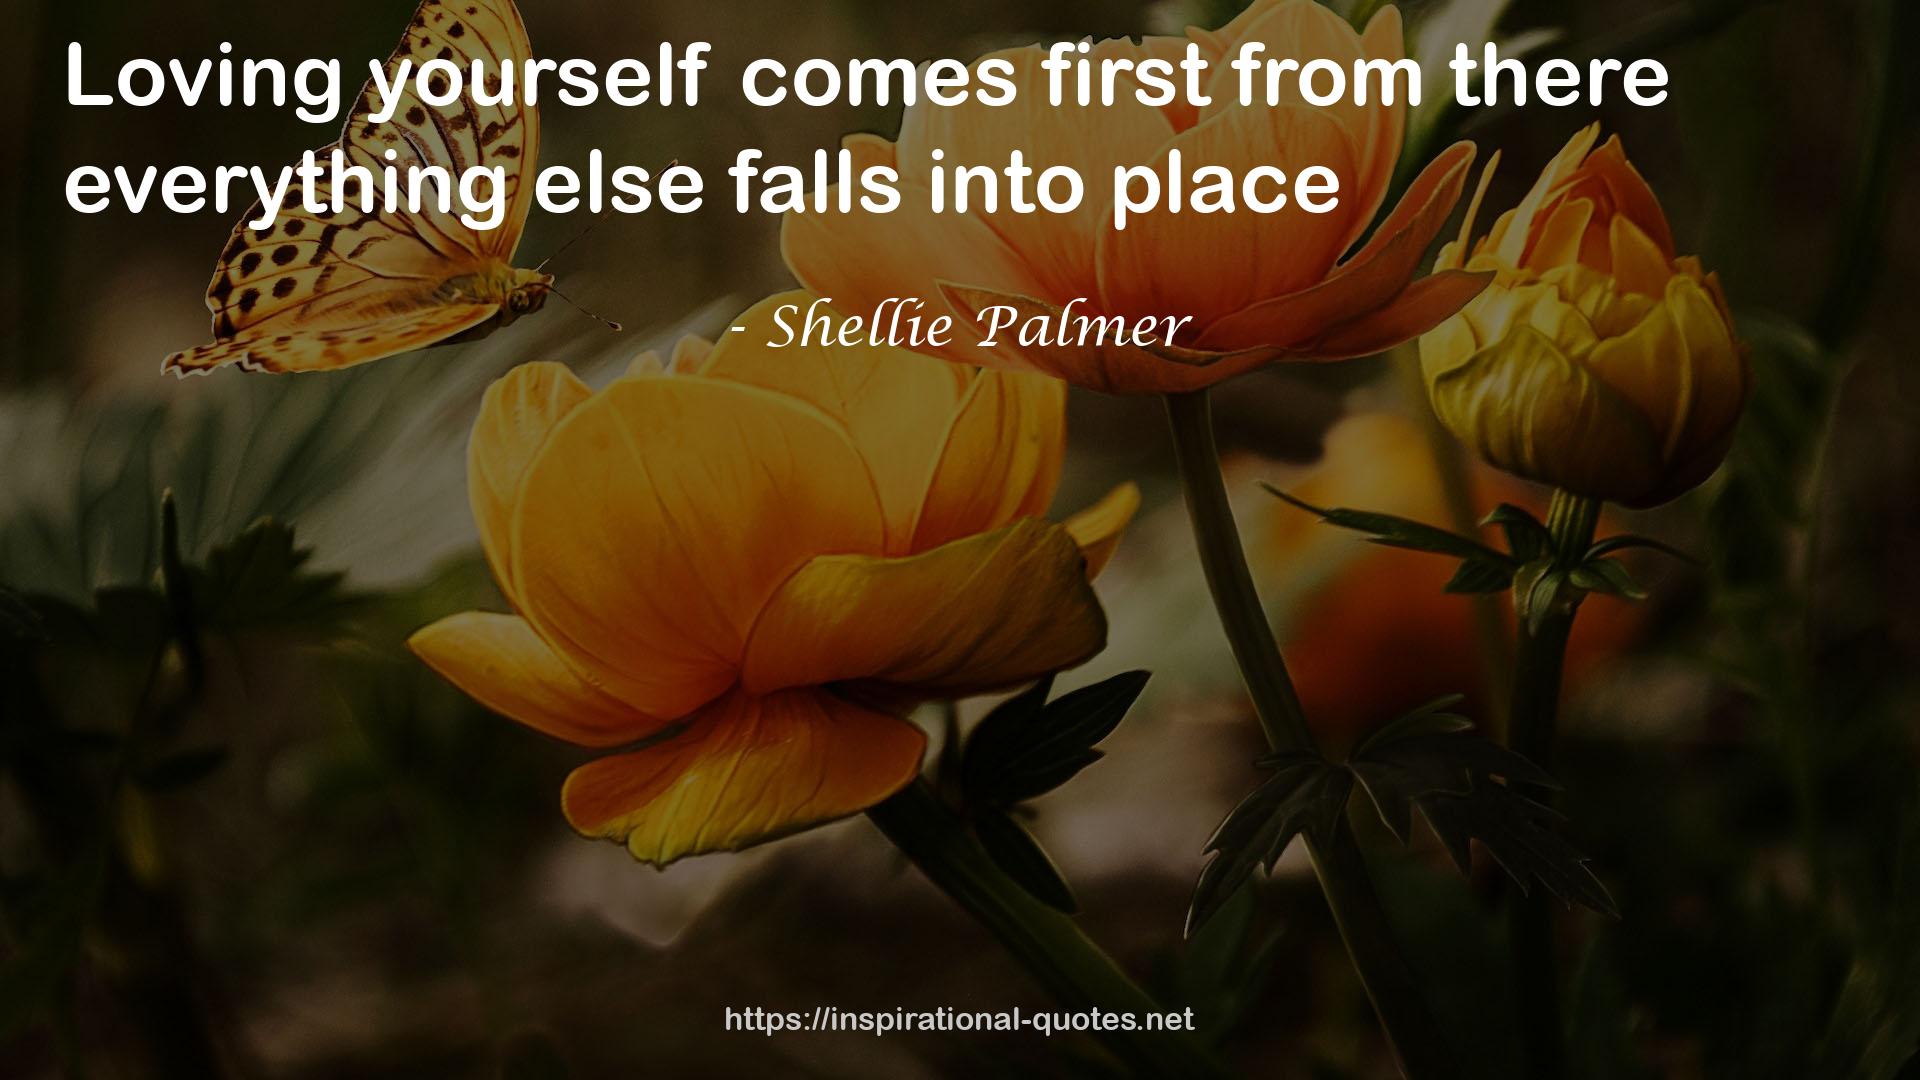 Shellie Palmer QUOTES